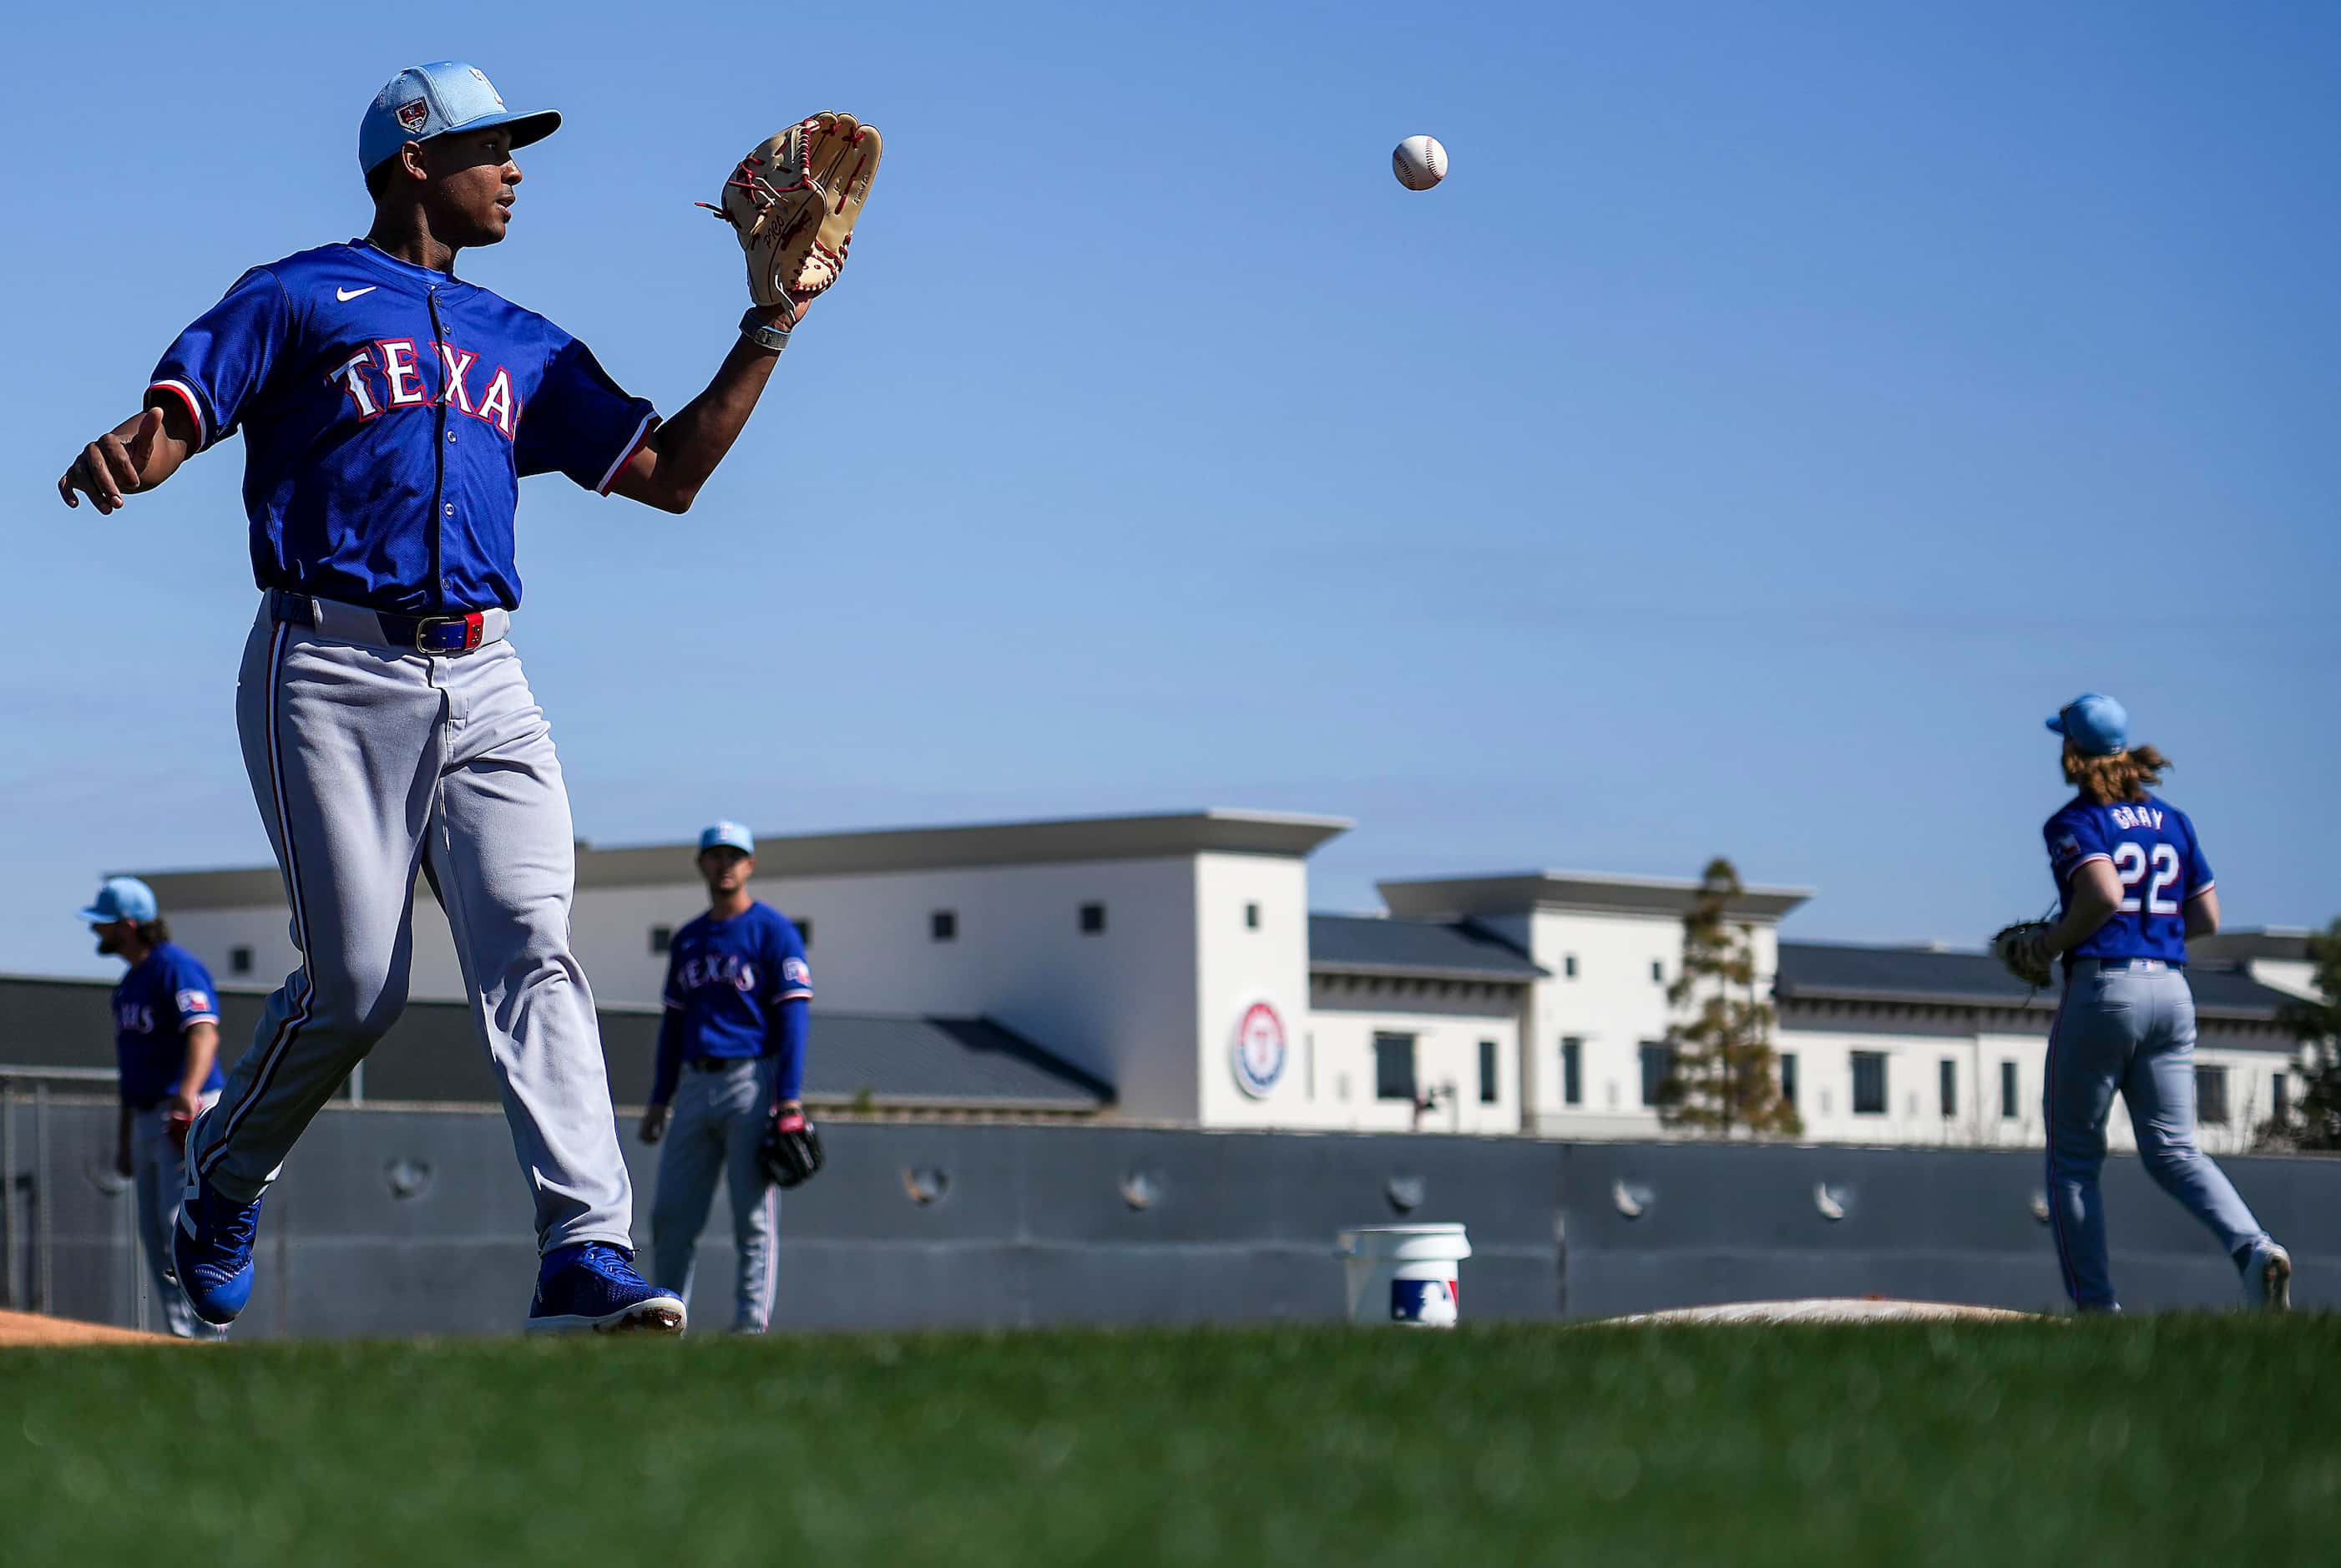 Texas Rangers pitcher José Leclerc participates in a fielding drill during a spring training...